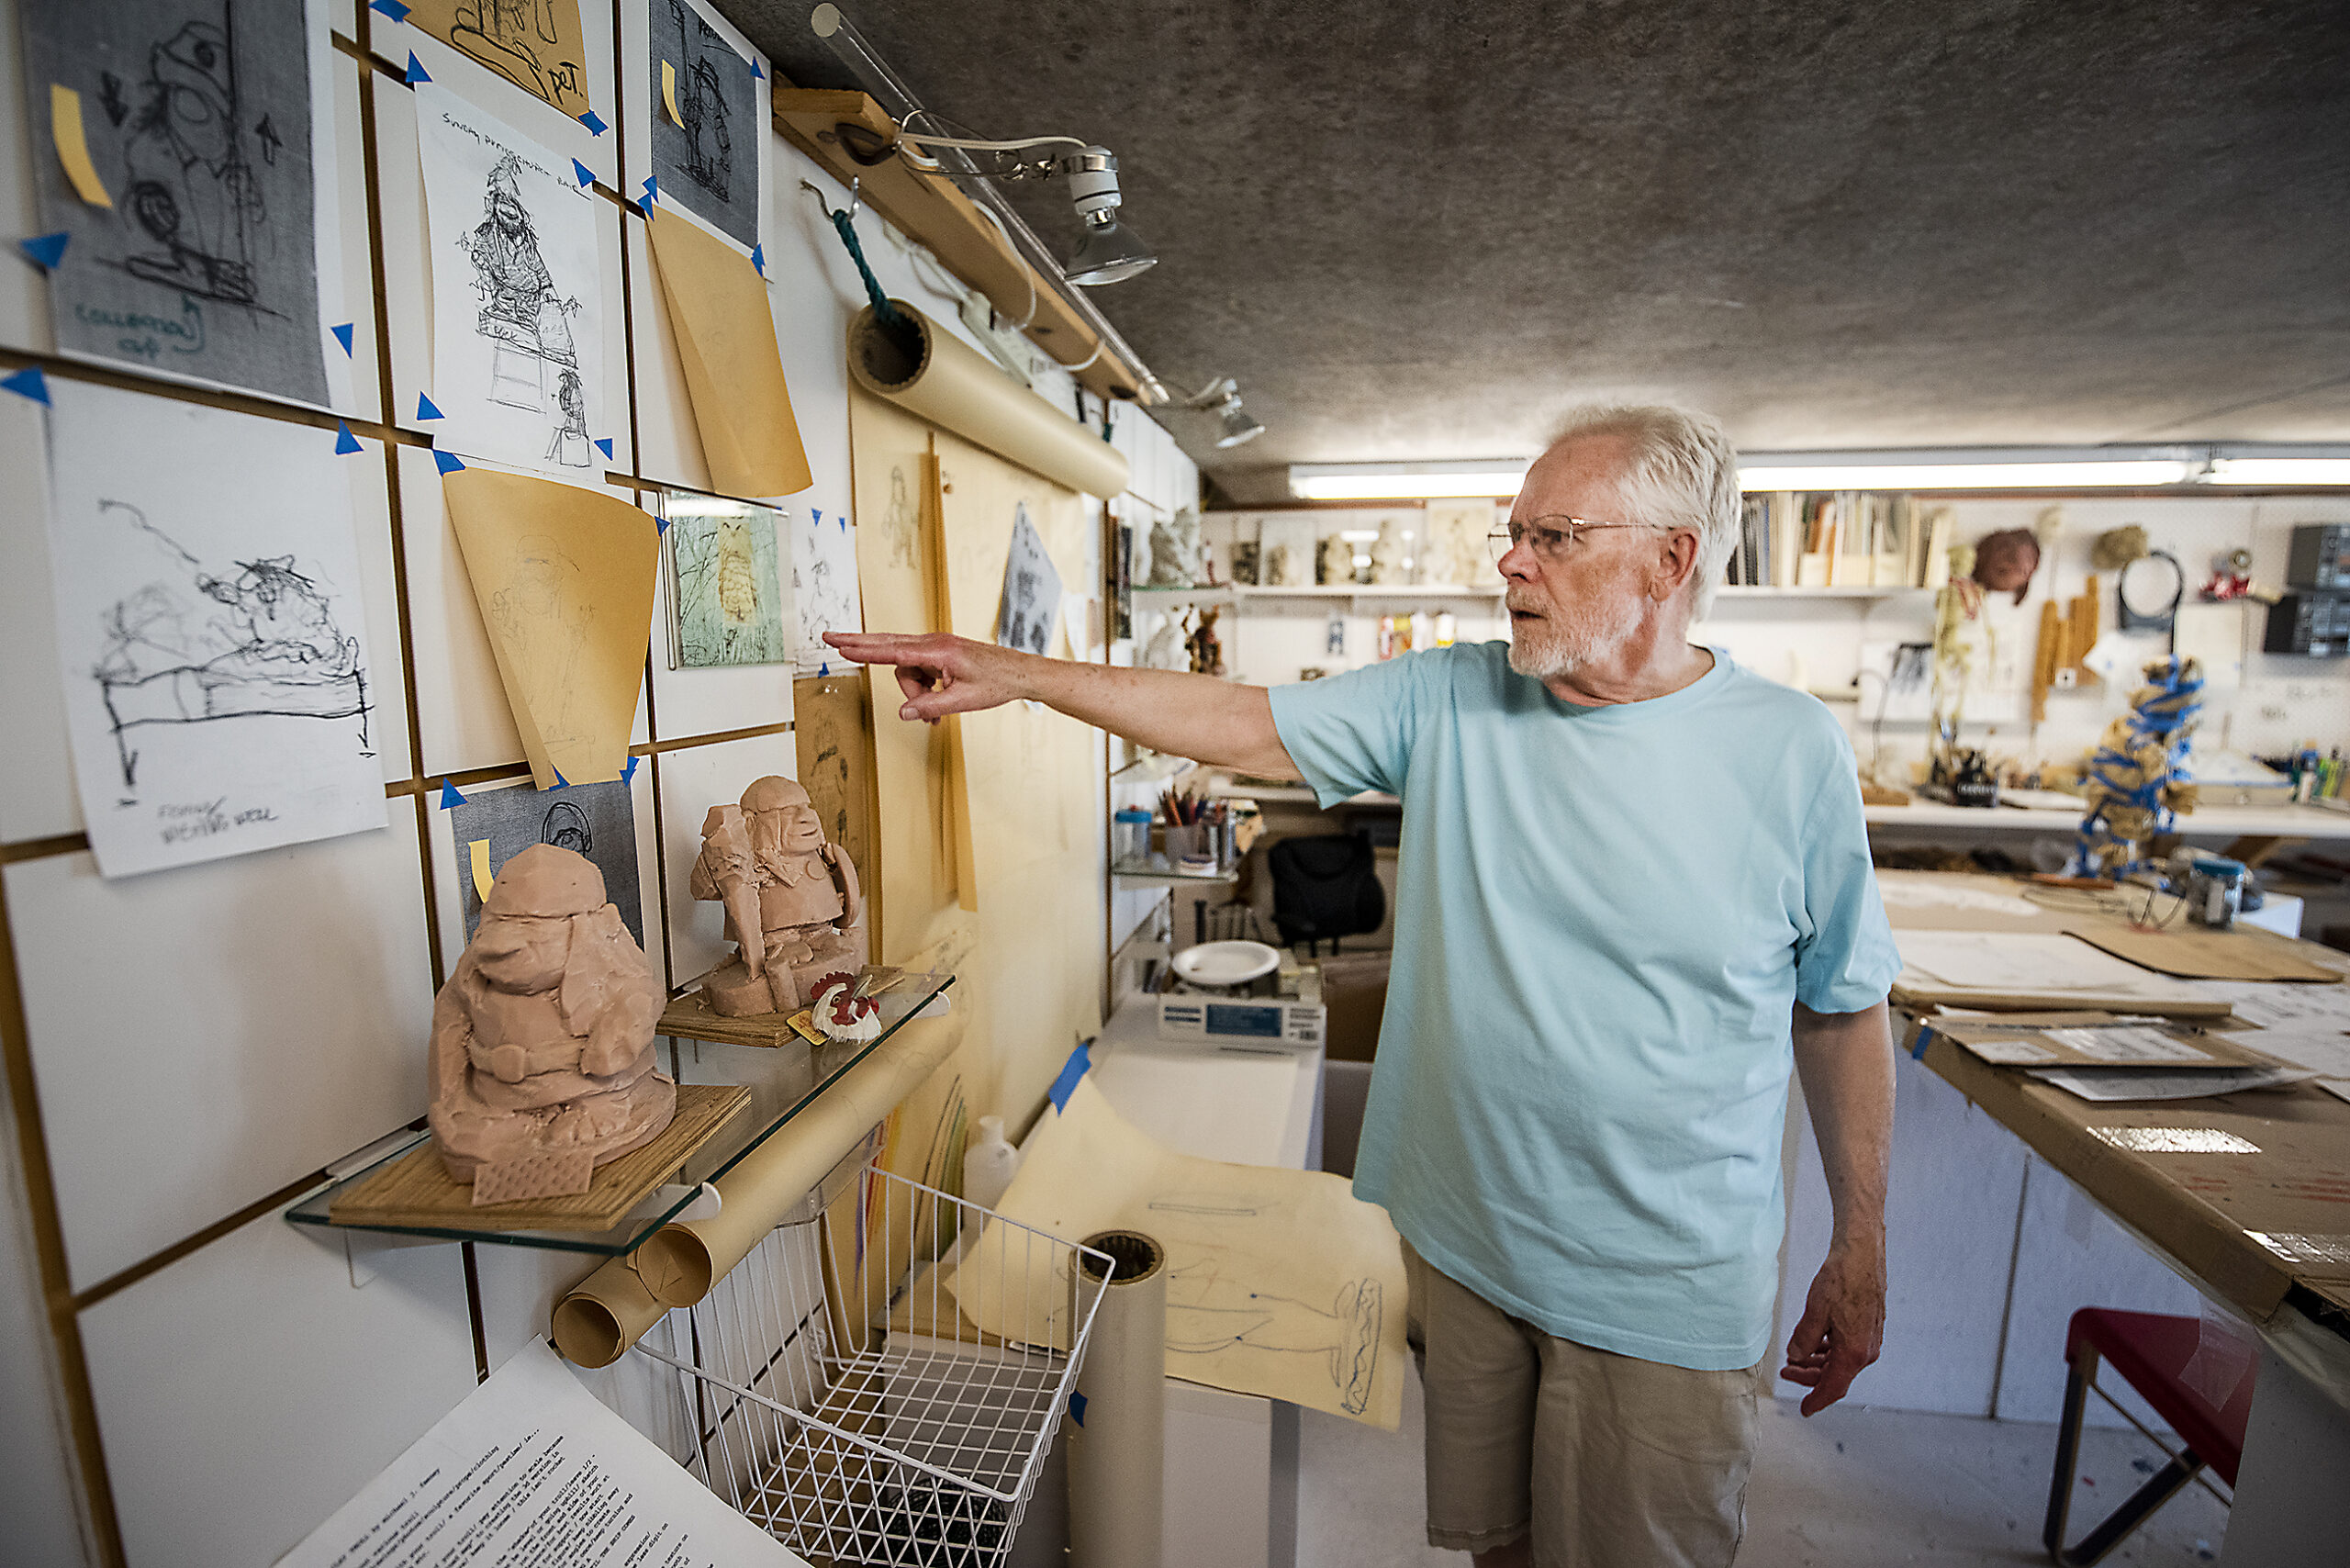 An artist points at many sketches pinned up around his studio.